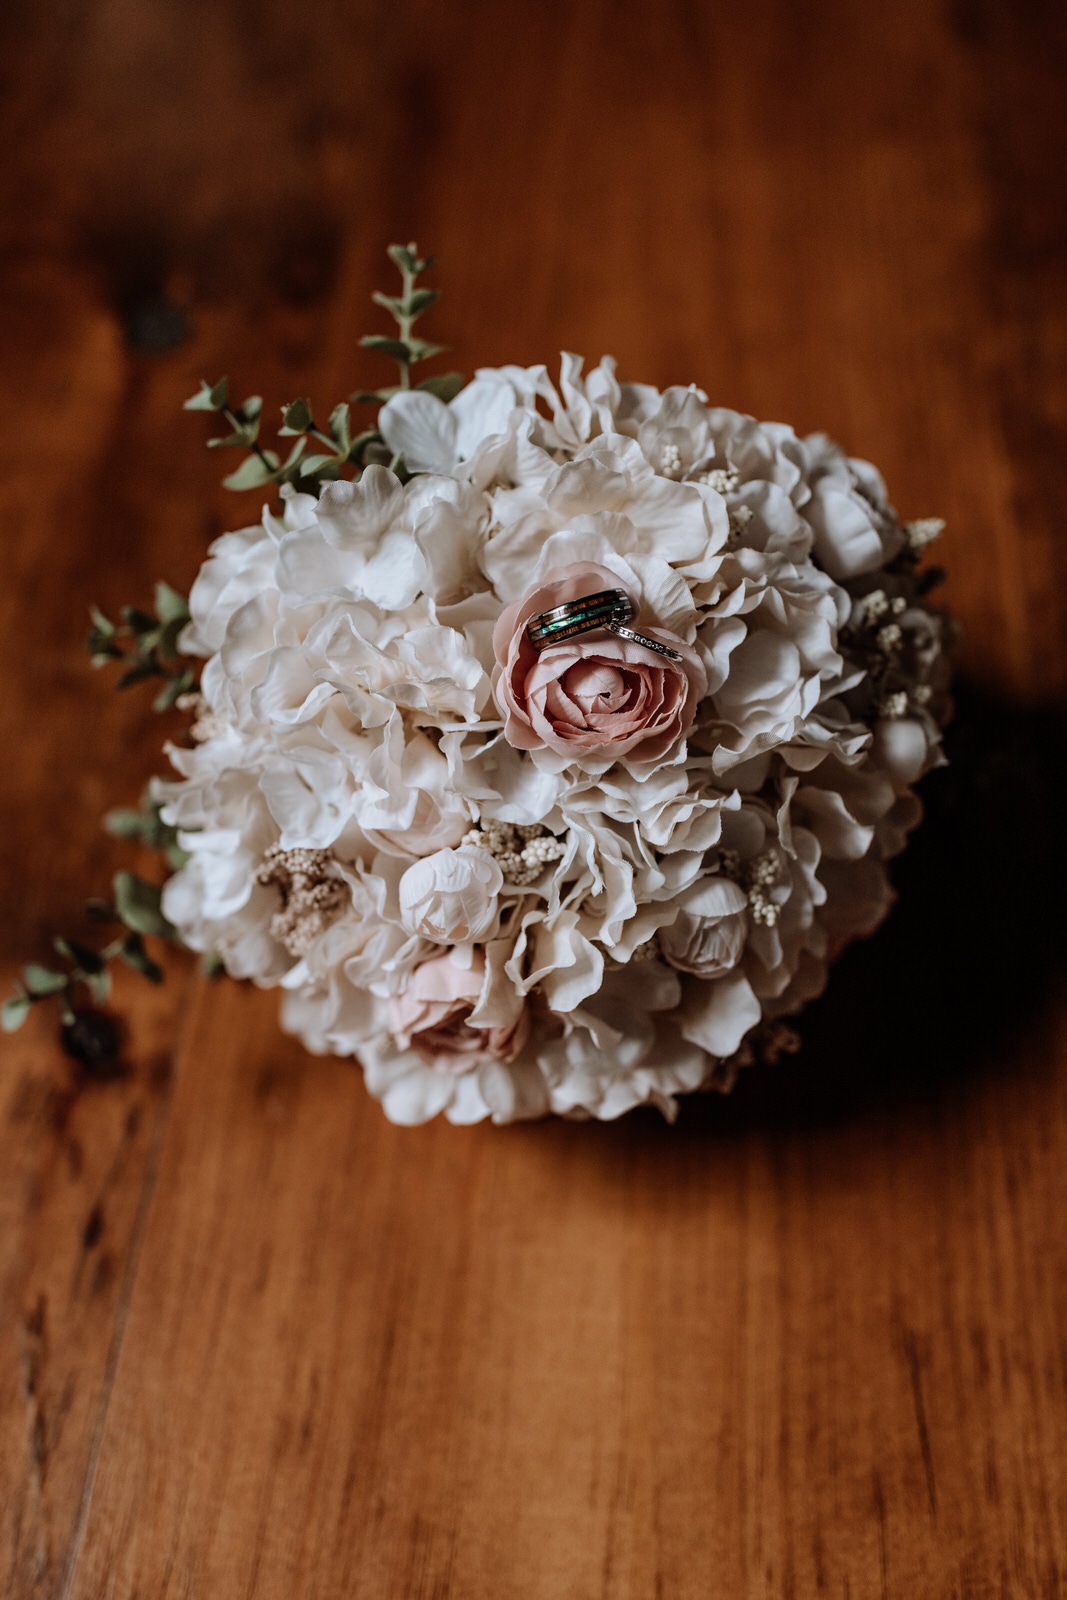 Wedding bouquet of flowers with rings on top